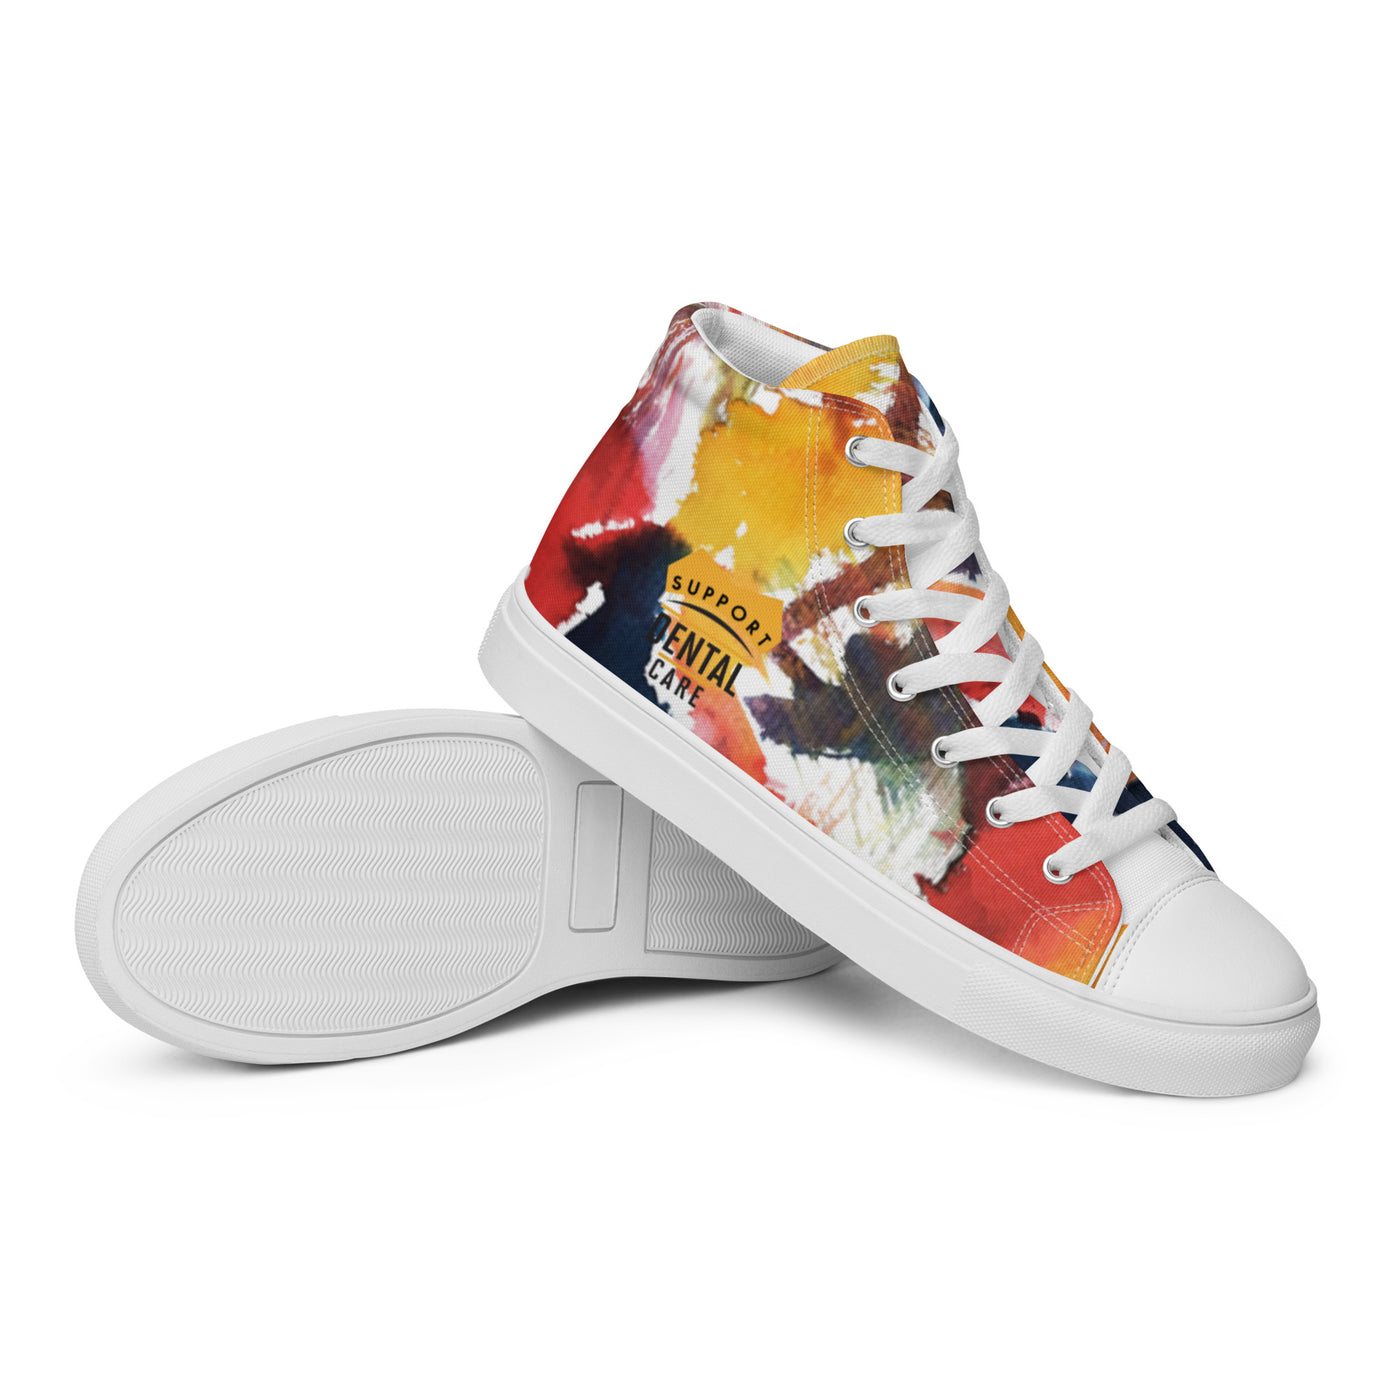 "Support Dental Care" Women's high top canvas shoes - Art work